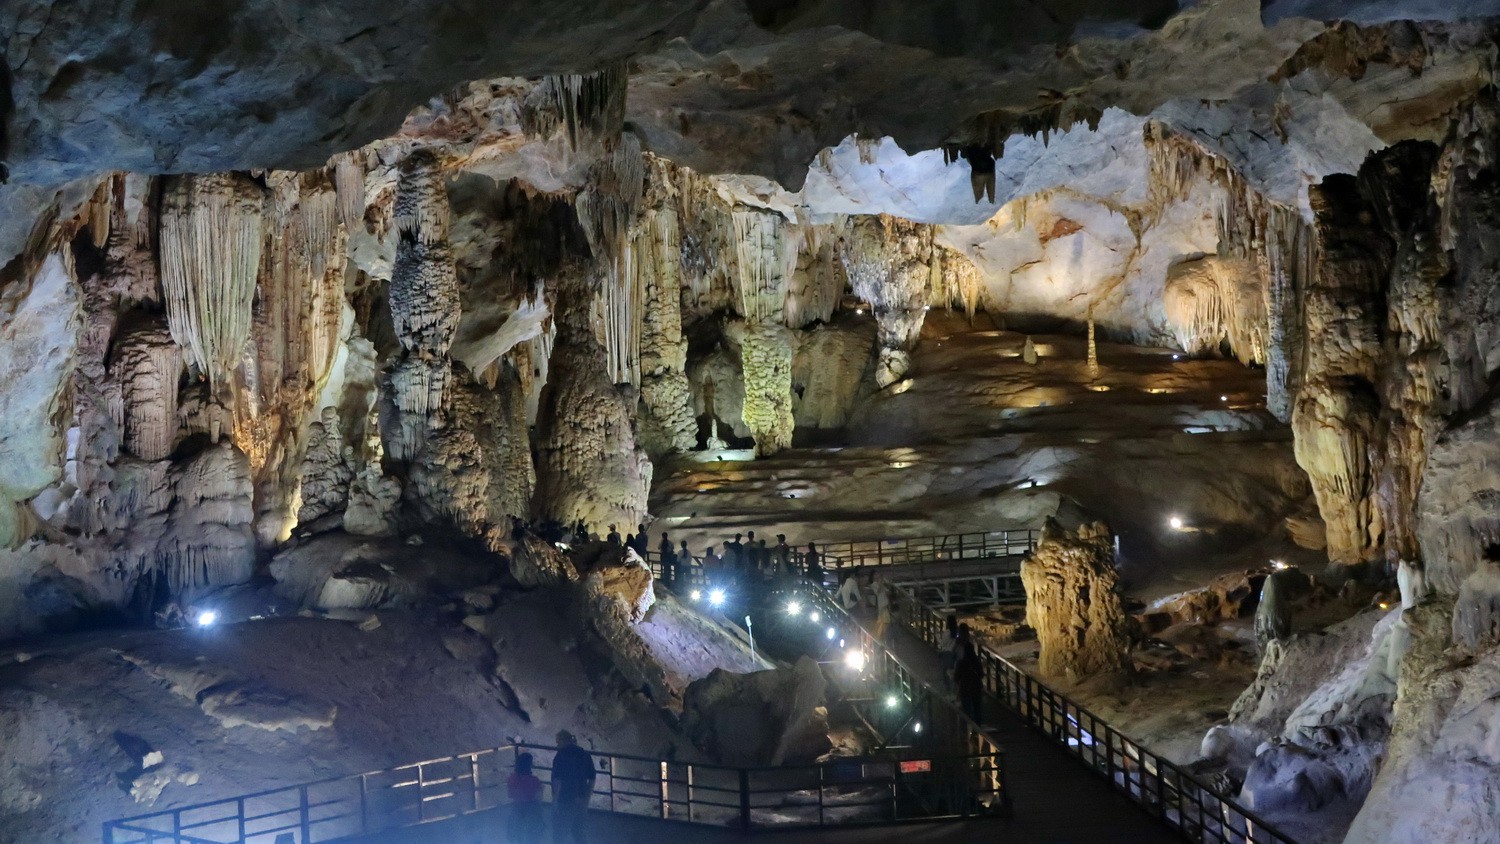 In the Paradise Cave west of Dong Hoi